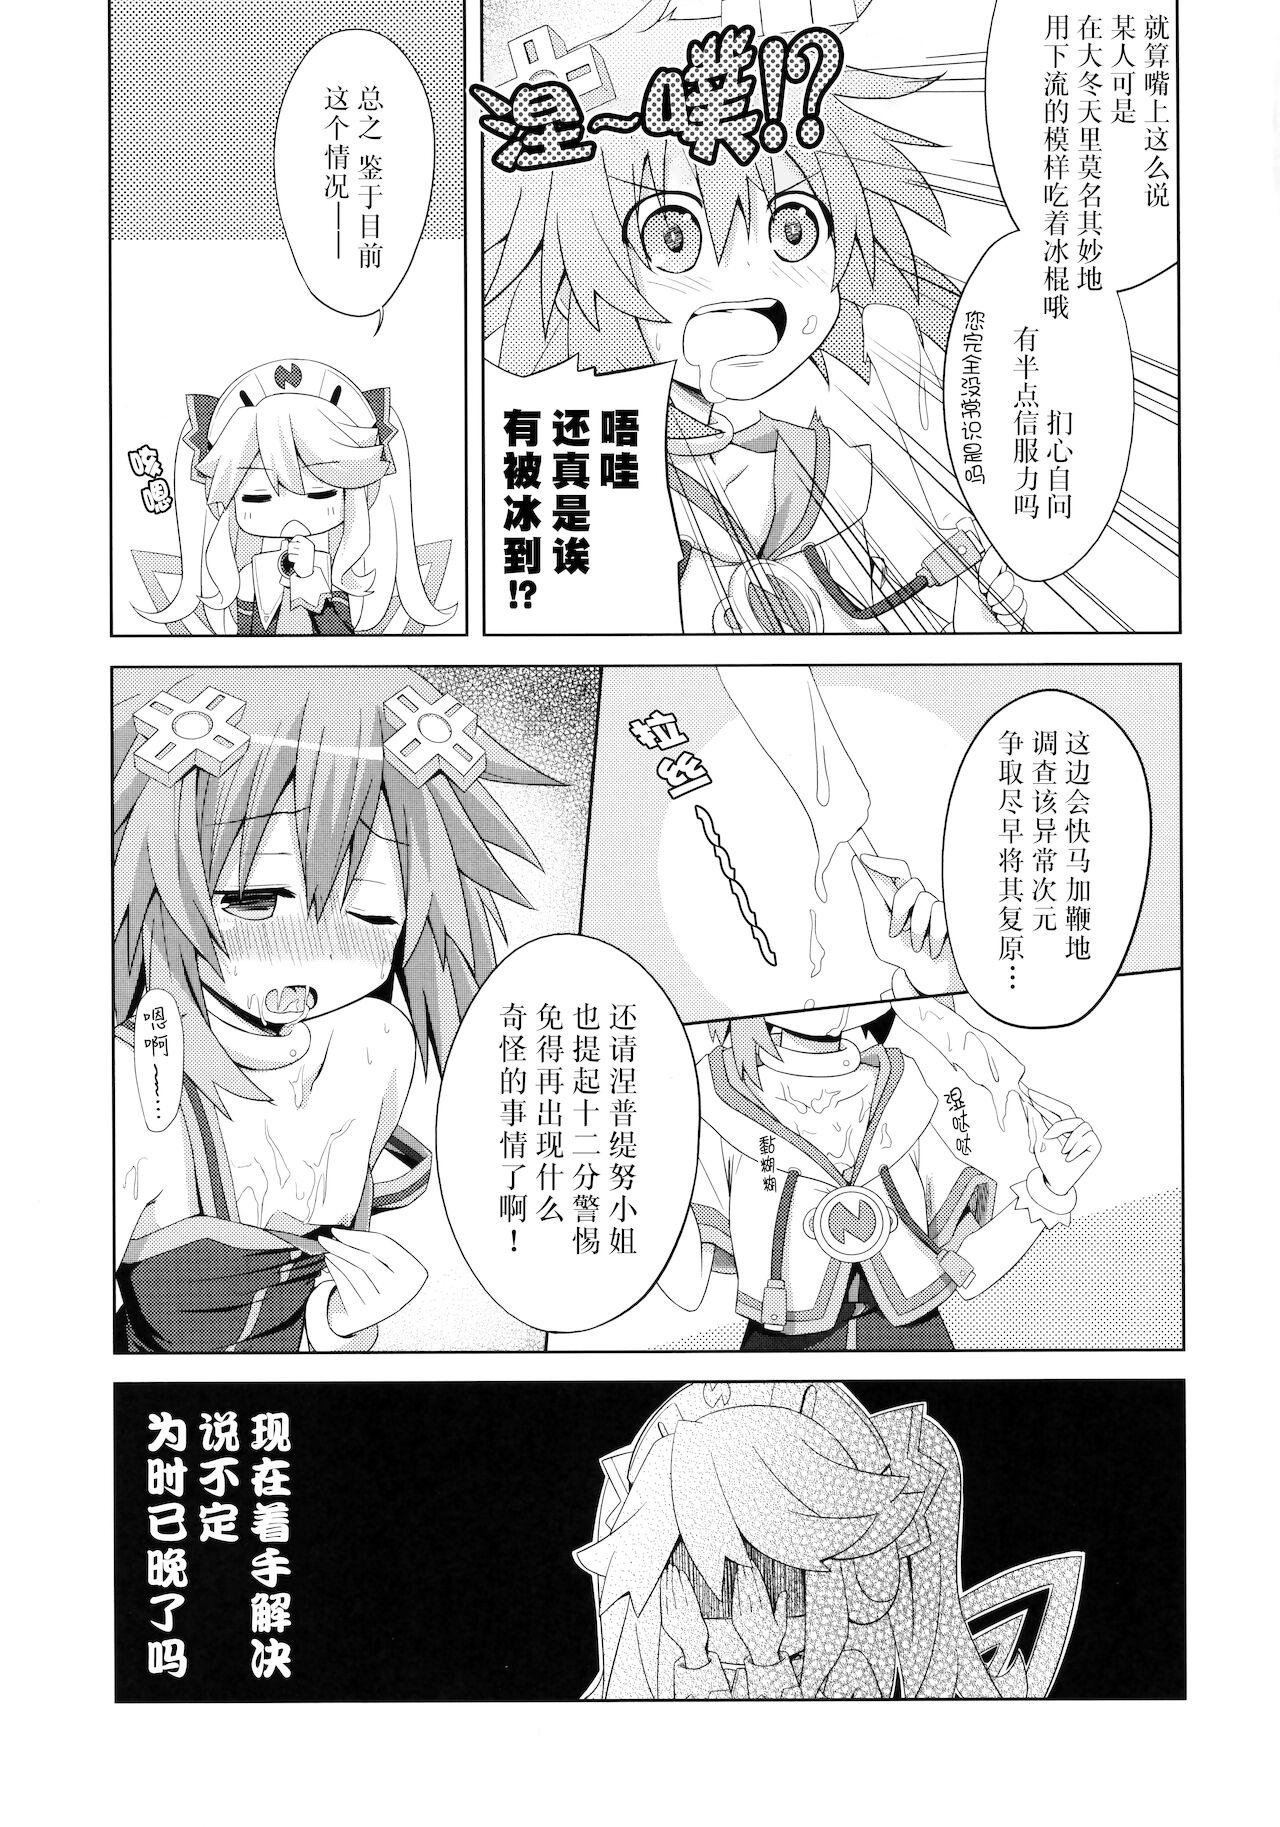 Teenpussy A certain Nepgear was harmed in the making of this doujinshi - Hyperdimension neptunia | choujigen game neptune Pinay - Page 6